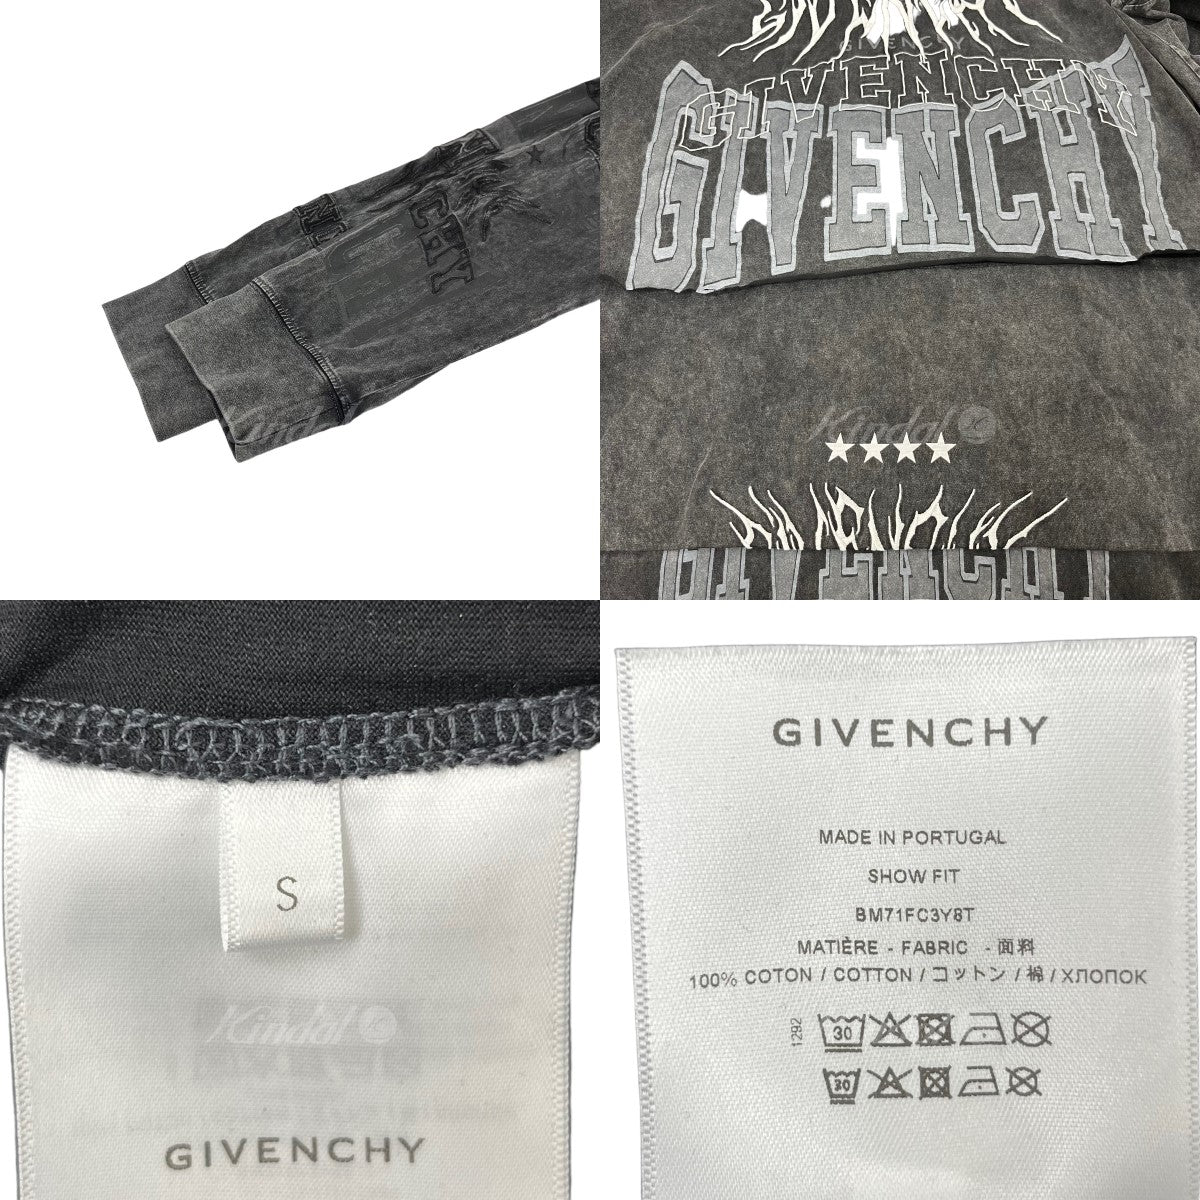 GIVENCHY(ジバンシィ) 2022AW「Overlapped Embroidered Tee」 刺繍レイヤード長袖Tシャツ